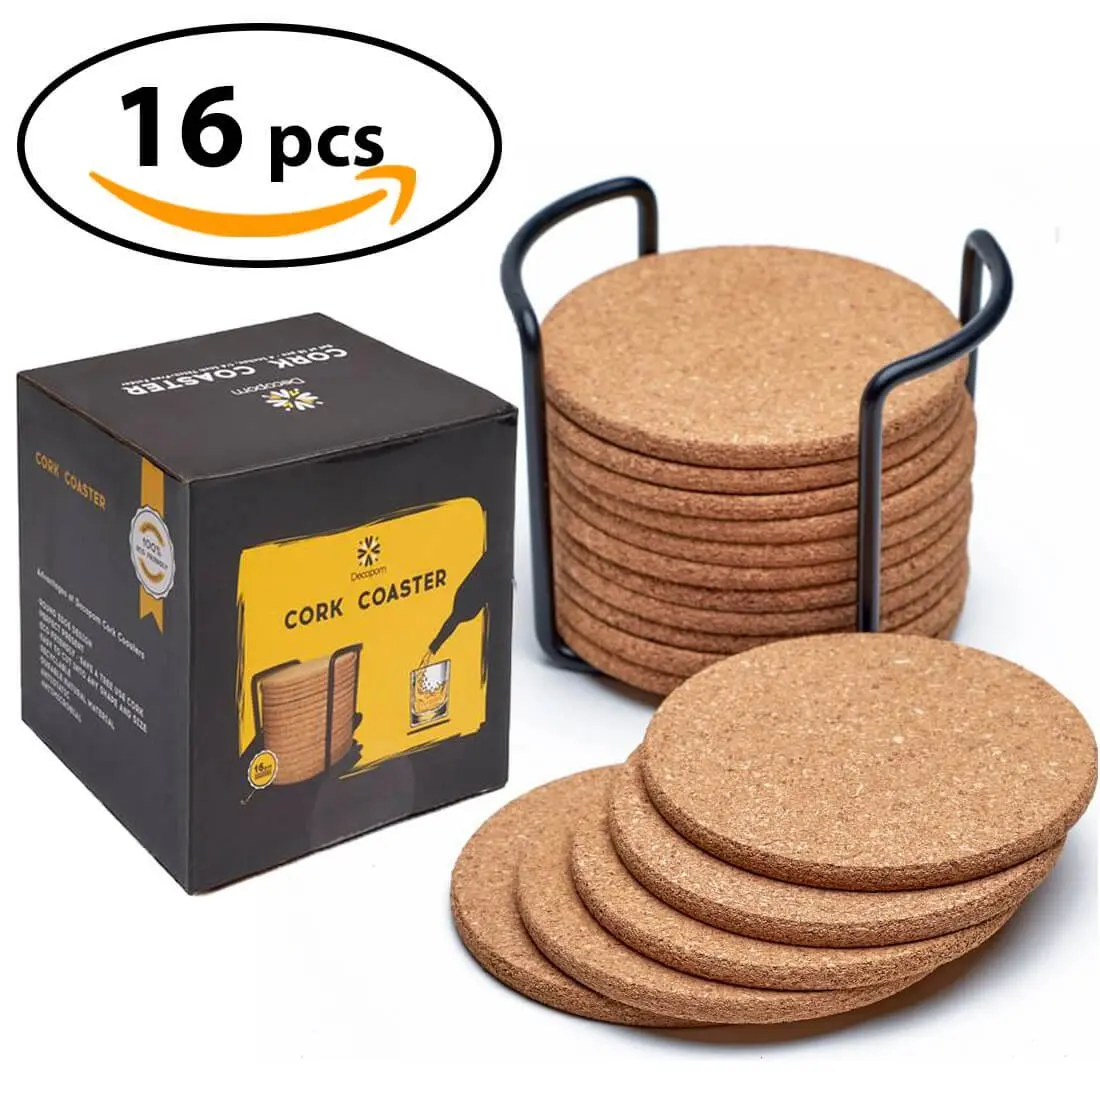 

Natural Cork Coasters with Metal Holder set of 8 pcs -4 inch 1/5 inch Thick Cold Drinks Wine Glasses Cups Mugs Cork Coaster, Cmyk printing